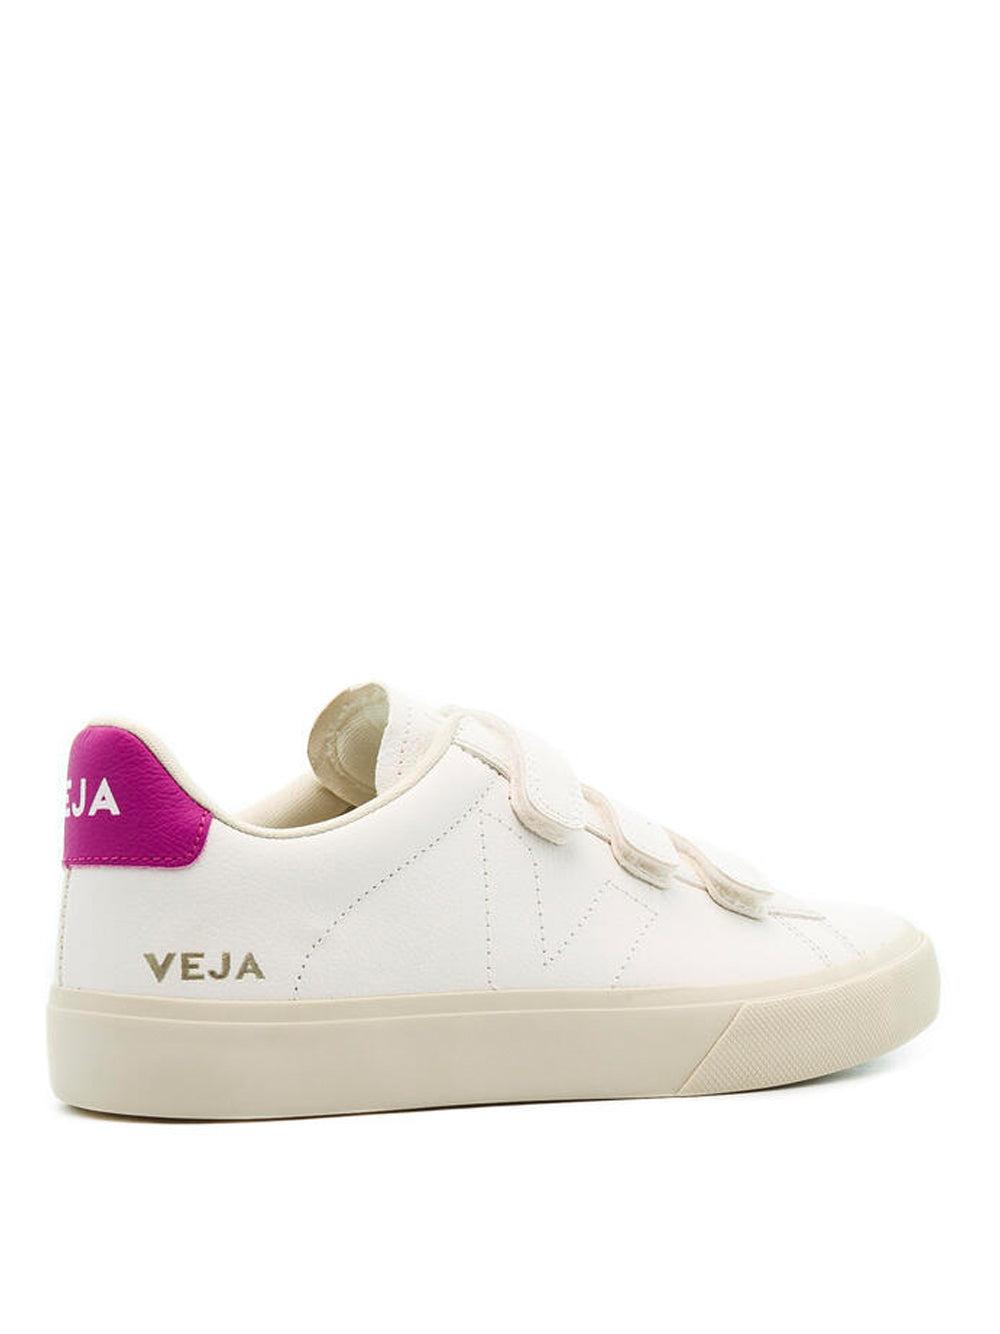 Veja Campo Touch-strap Sneakers Extra Ultra Violet in White | Lyst